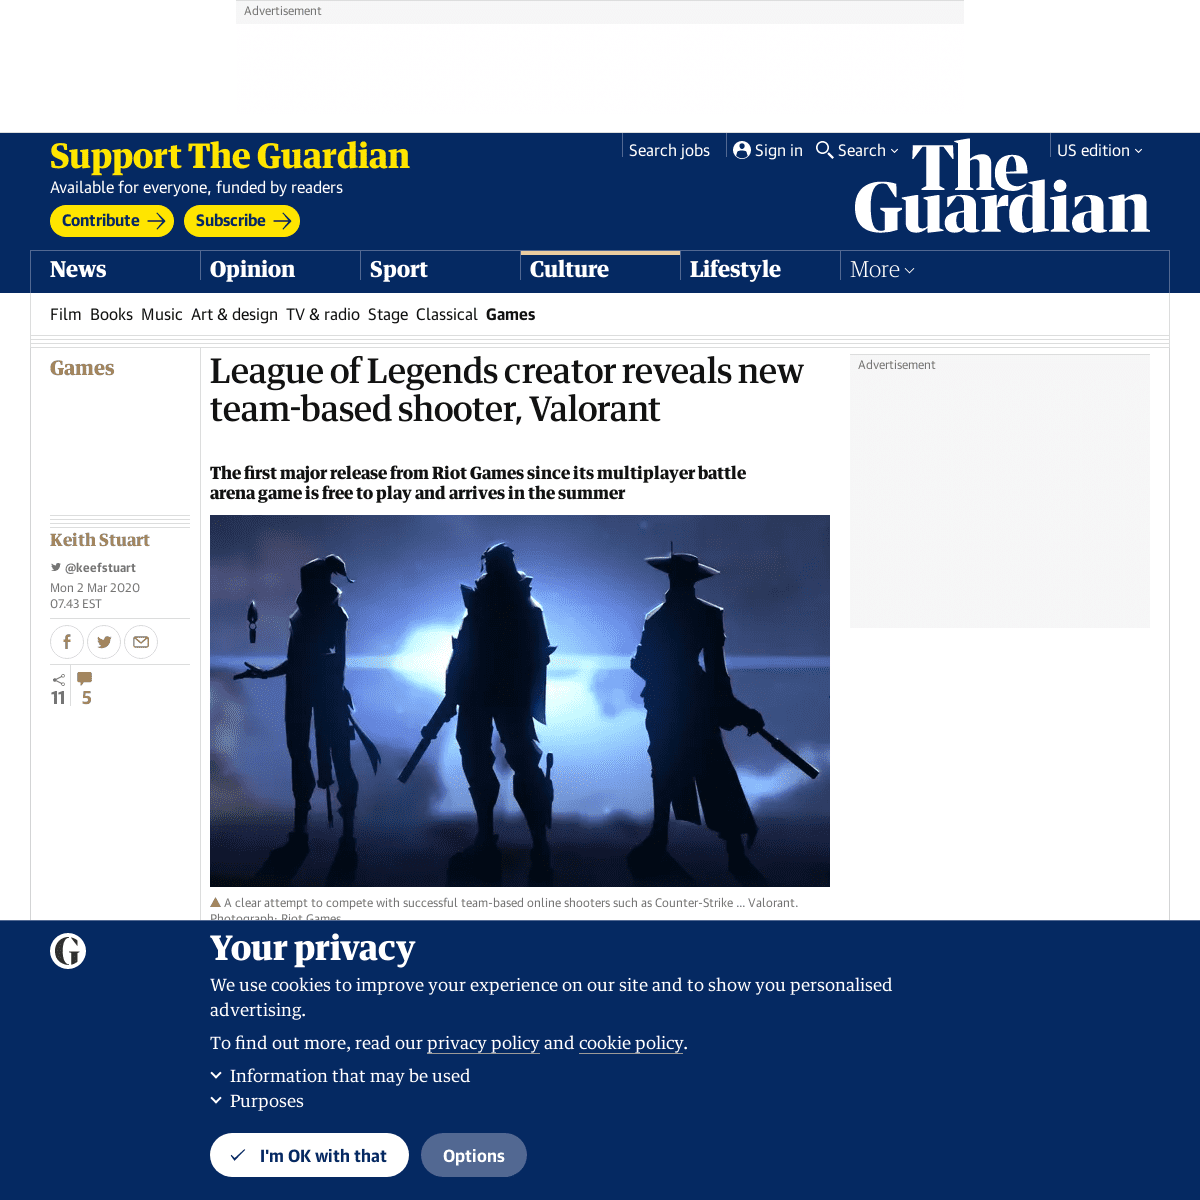 A complete backup of www.theguardian.com/games/2020/mar/02/league-of-legends-creator-reveals-new-team-based-shooter-valorant-rio